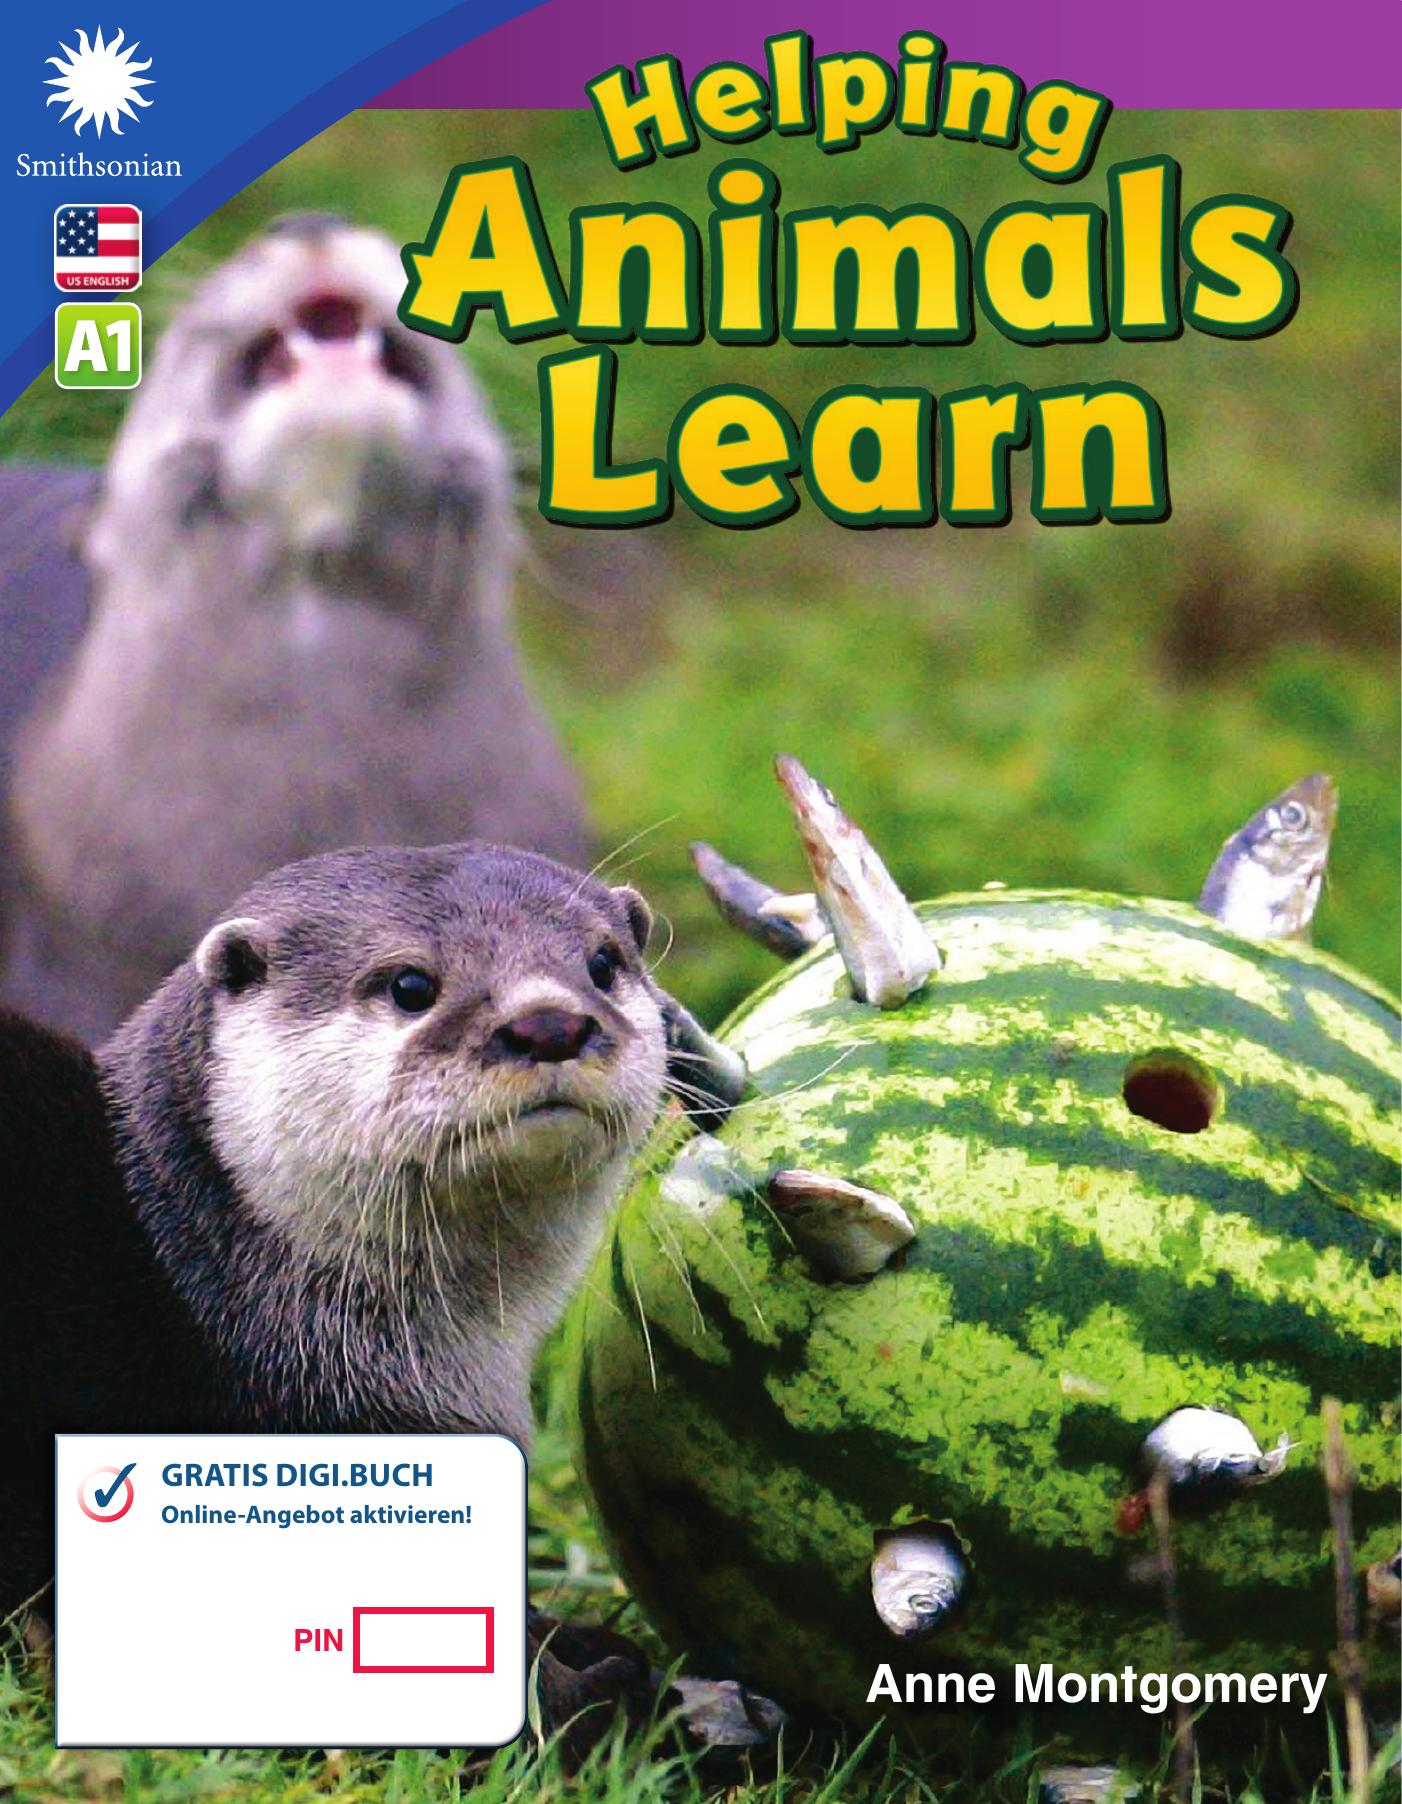 A1 – Helping Animals Learn